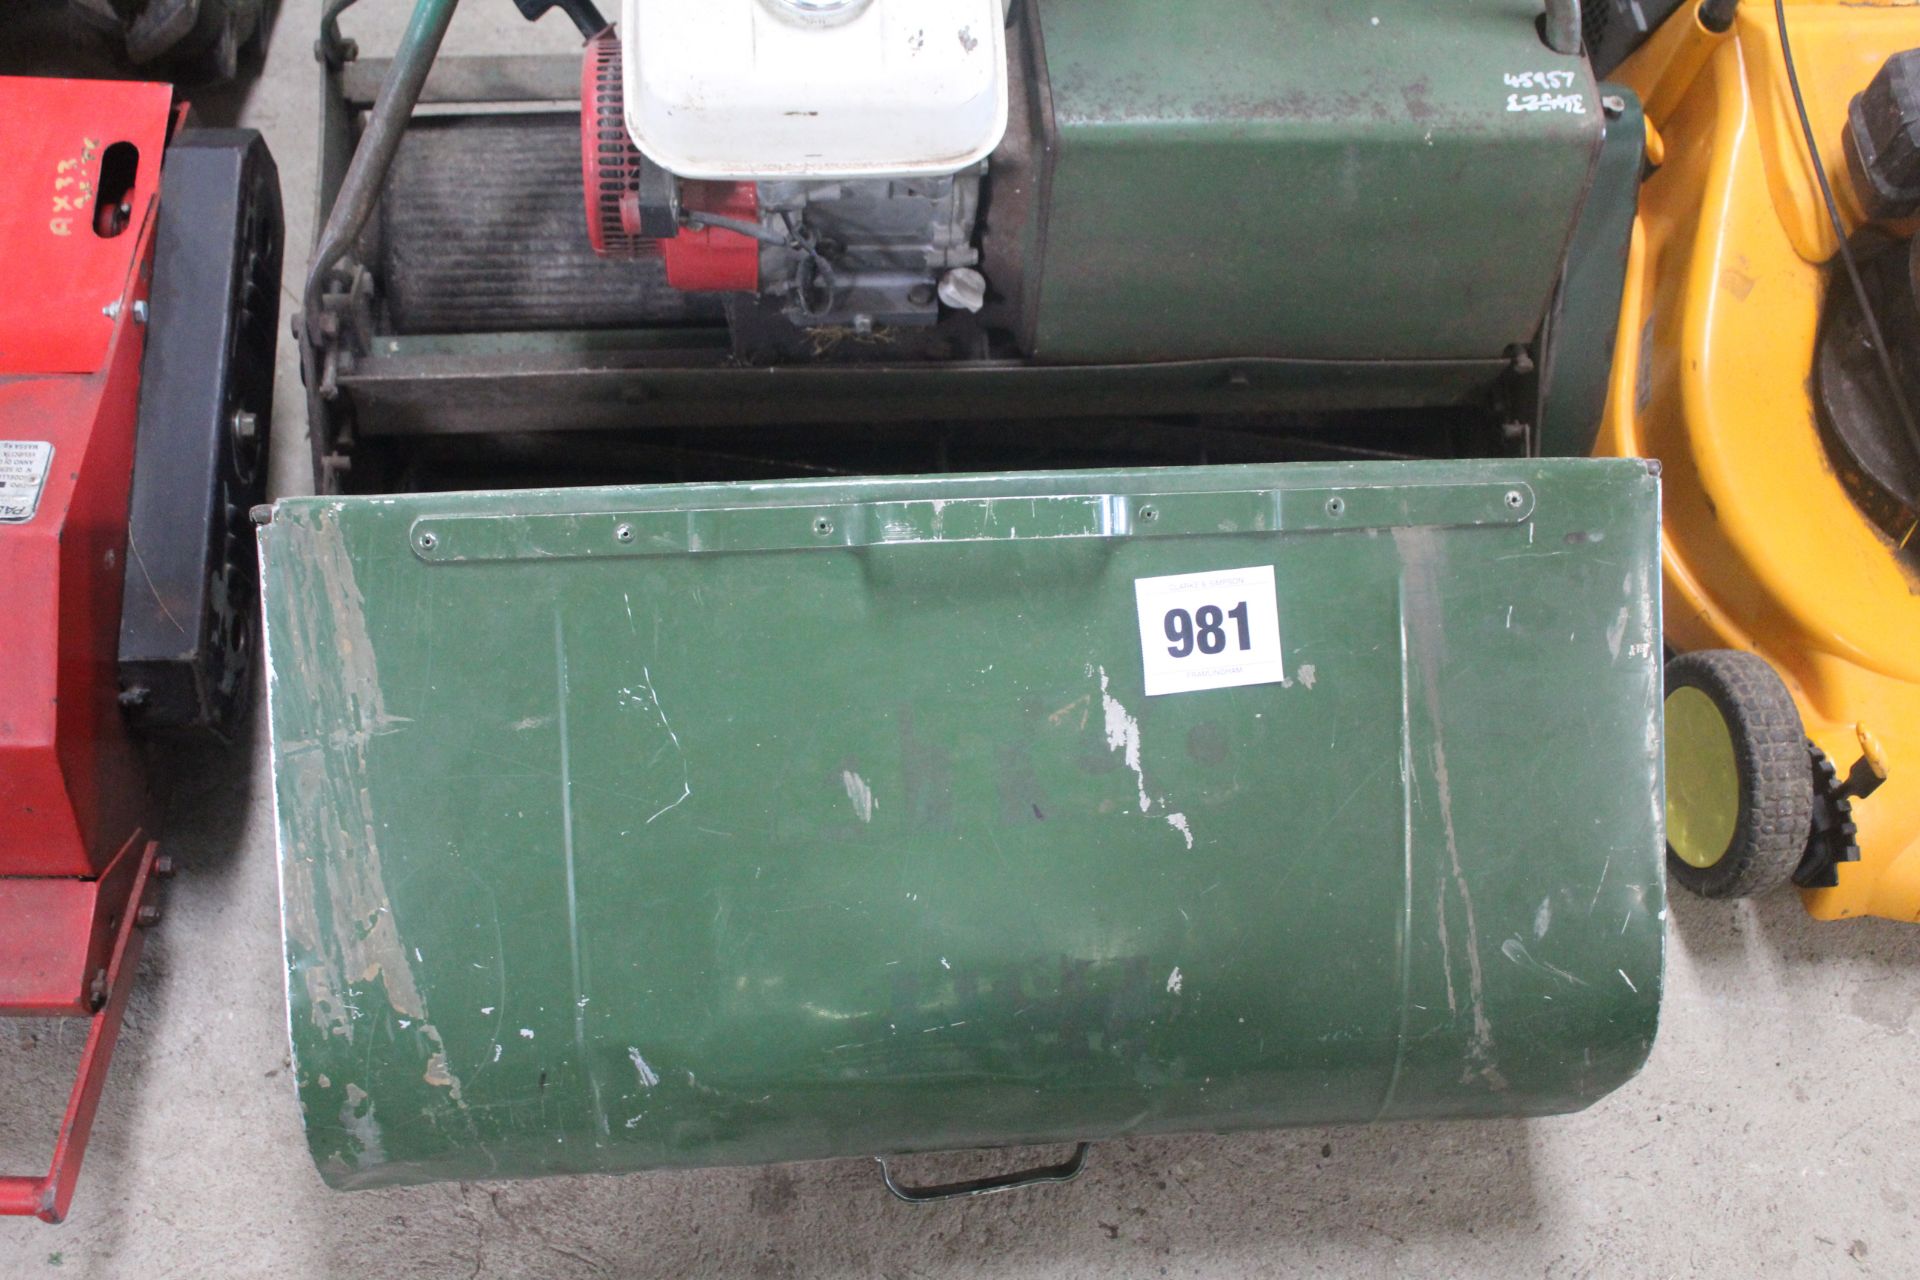 Atco B30 Royal lawn mower. With roller seat and grass box. From local deceased estate. - Image 2 of 11